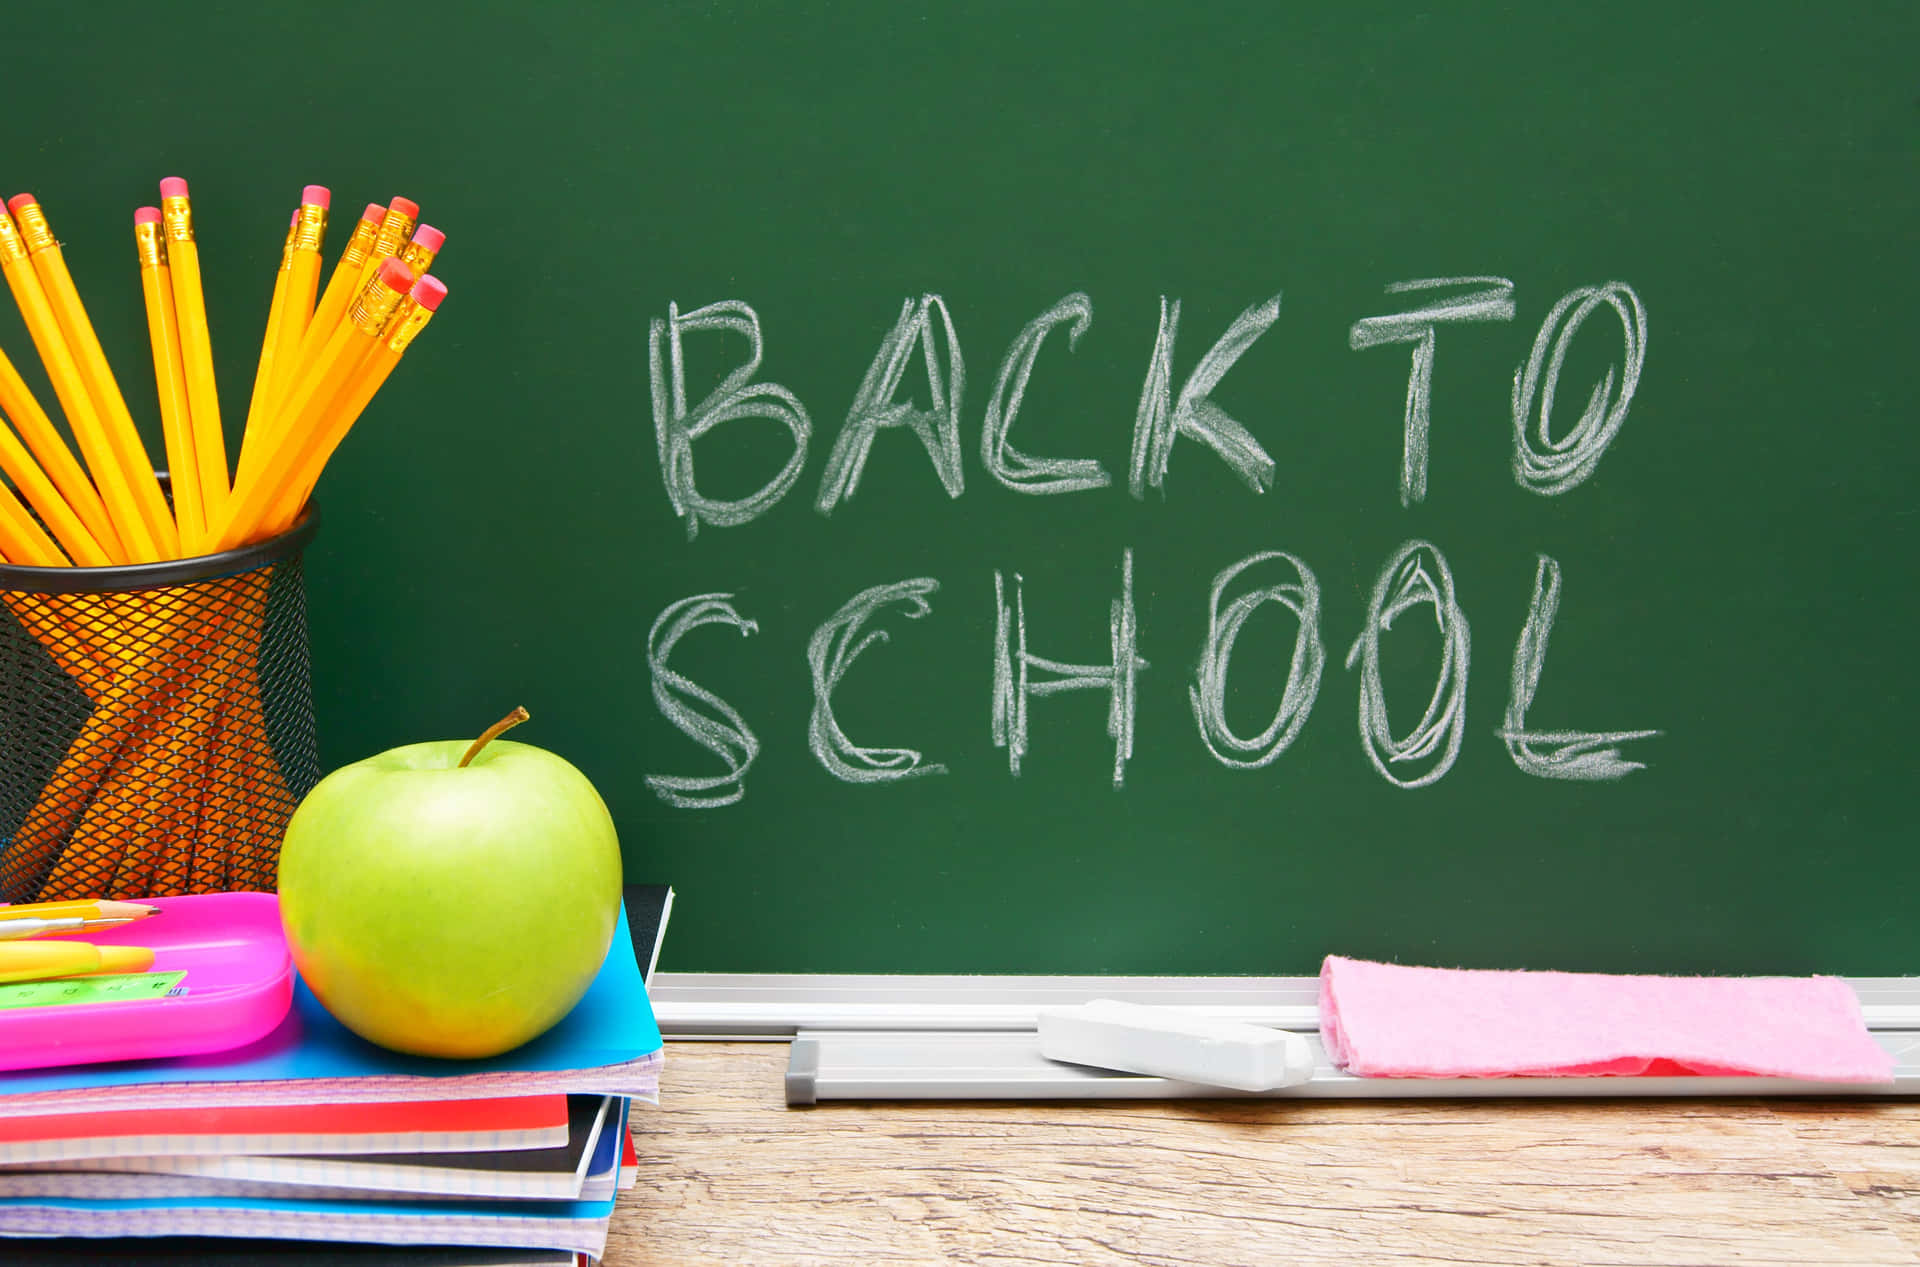 Get Ready For Back To School With These Essential Supplies!